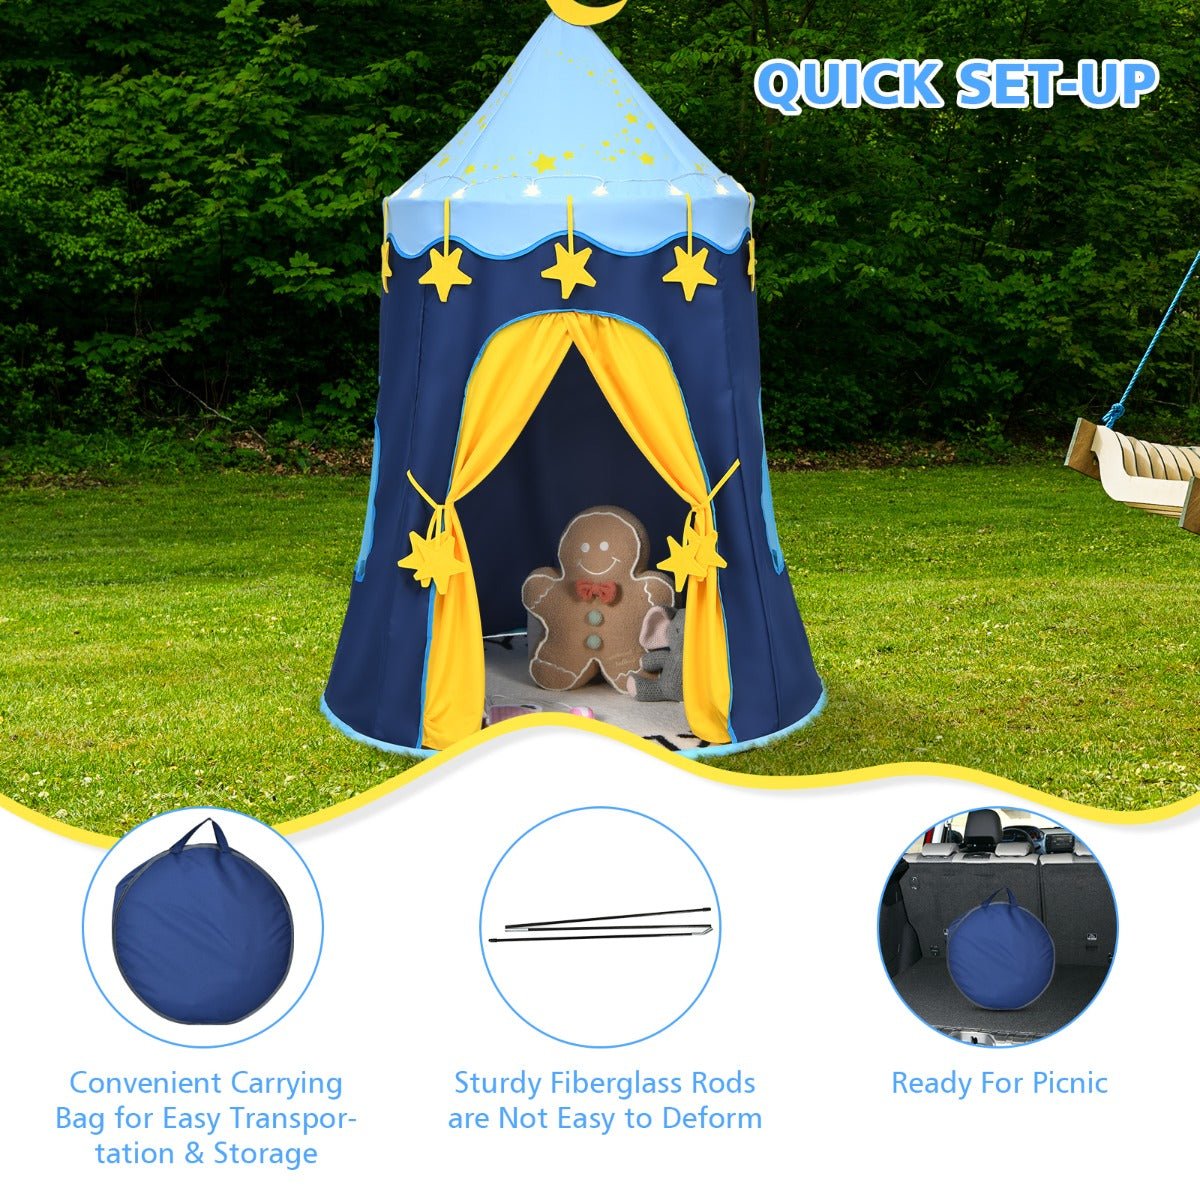 Carry the Magic: Kids Foldable Play Tent with Star Lights & Bag